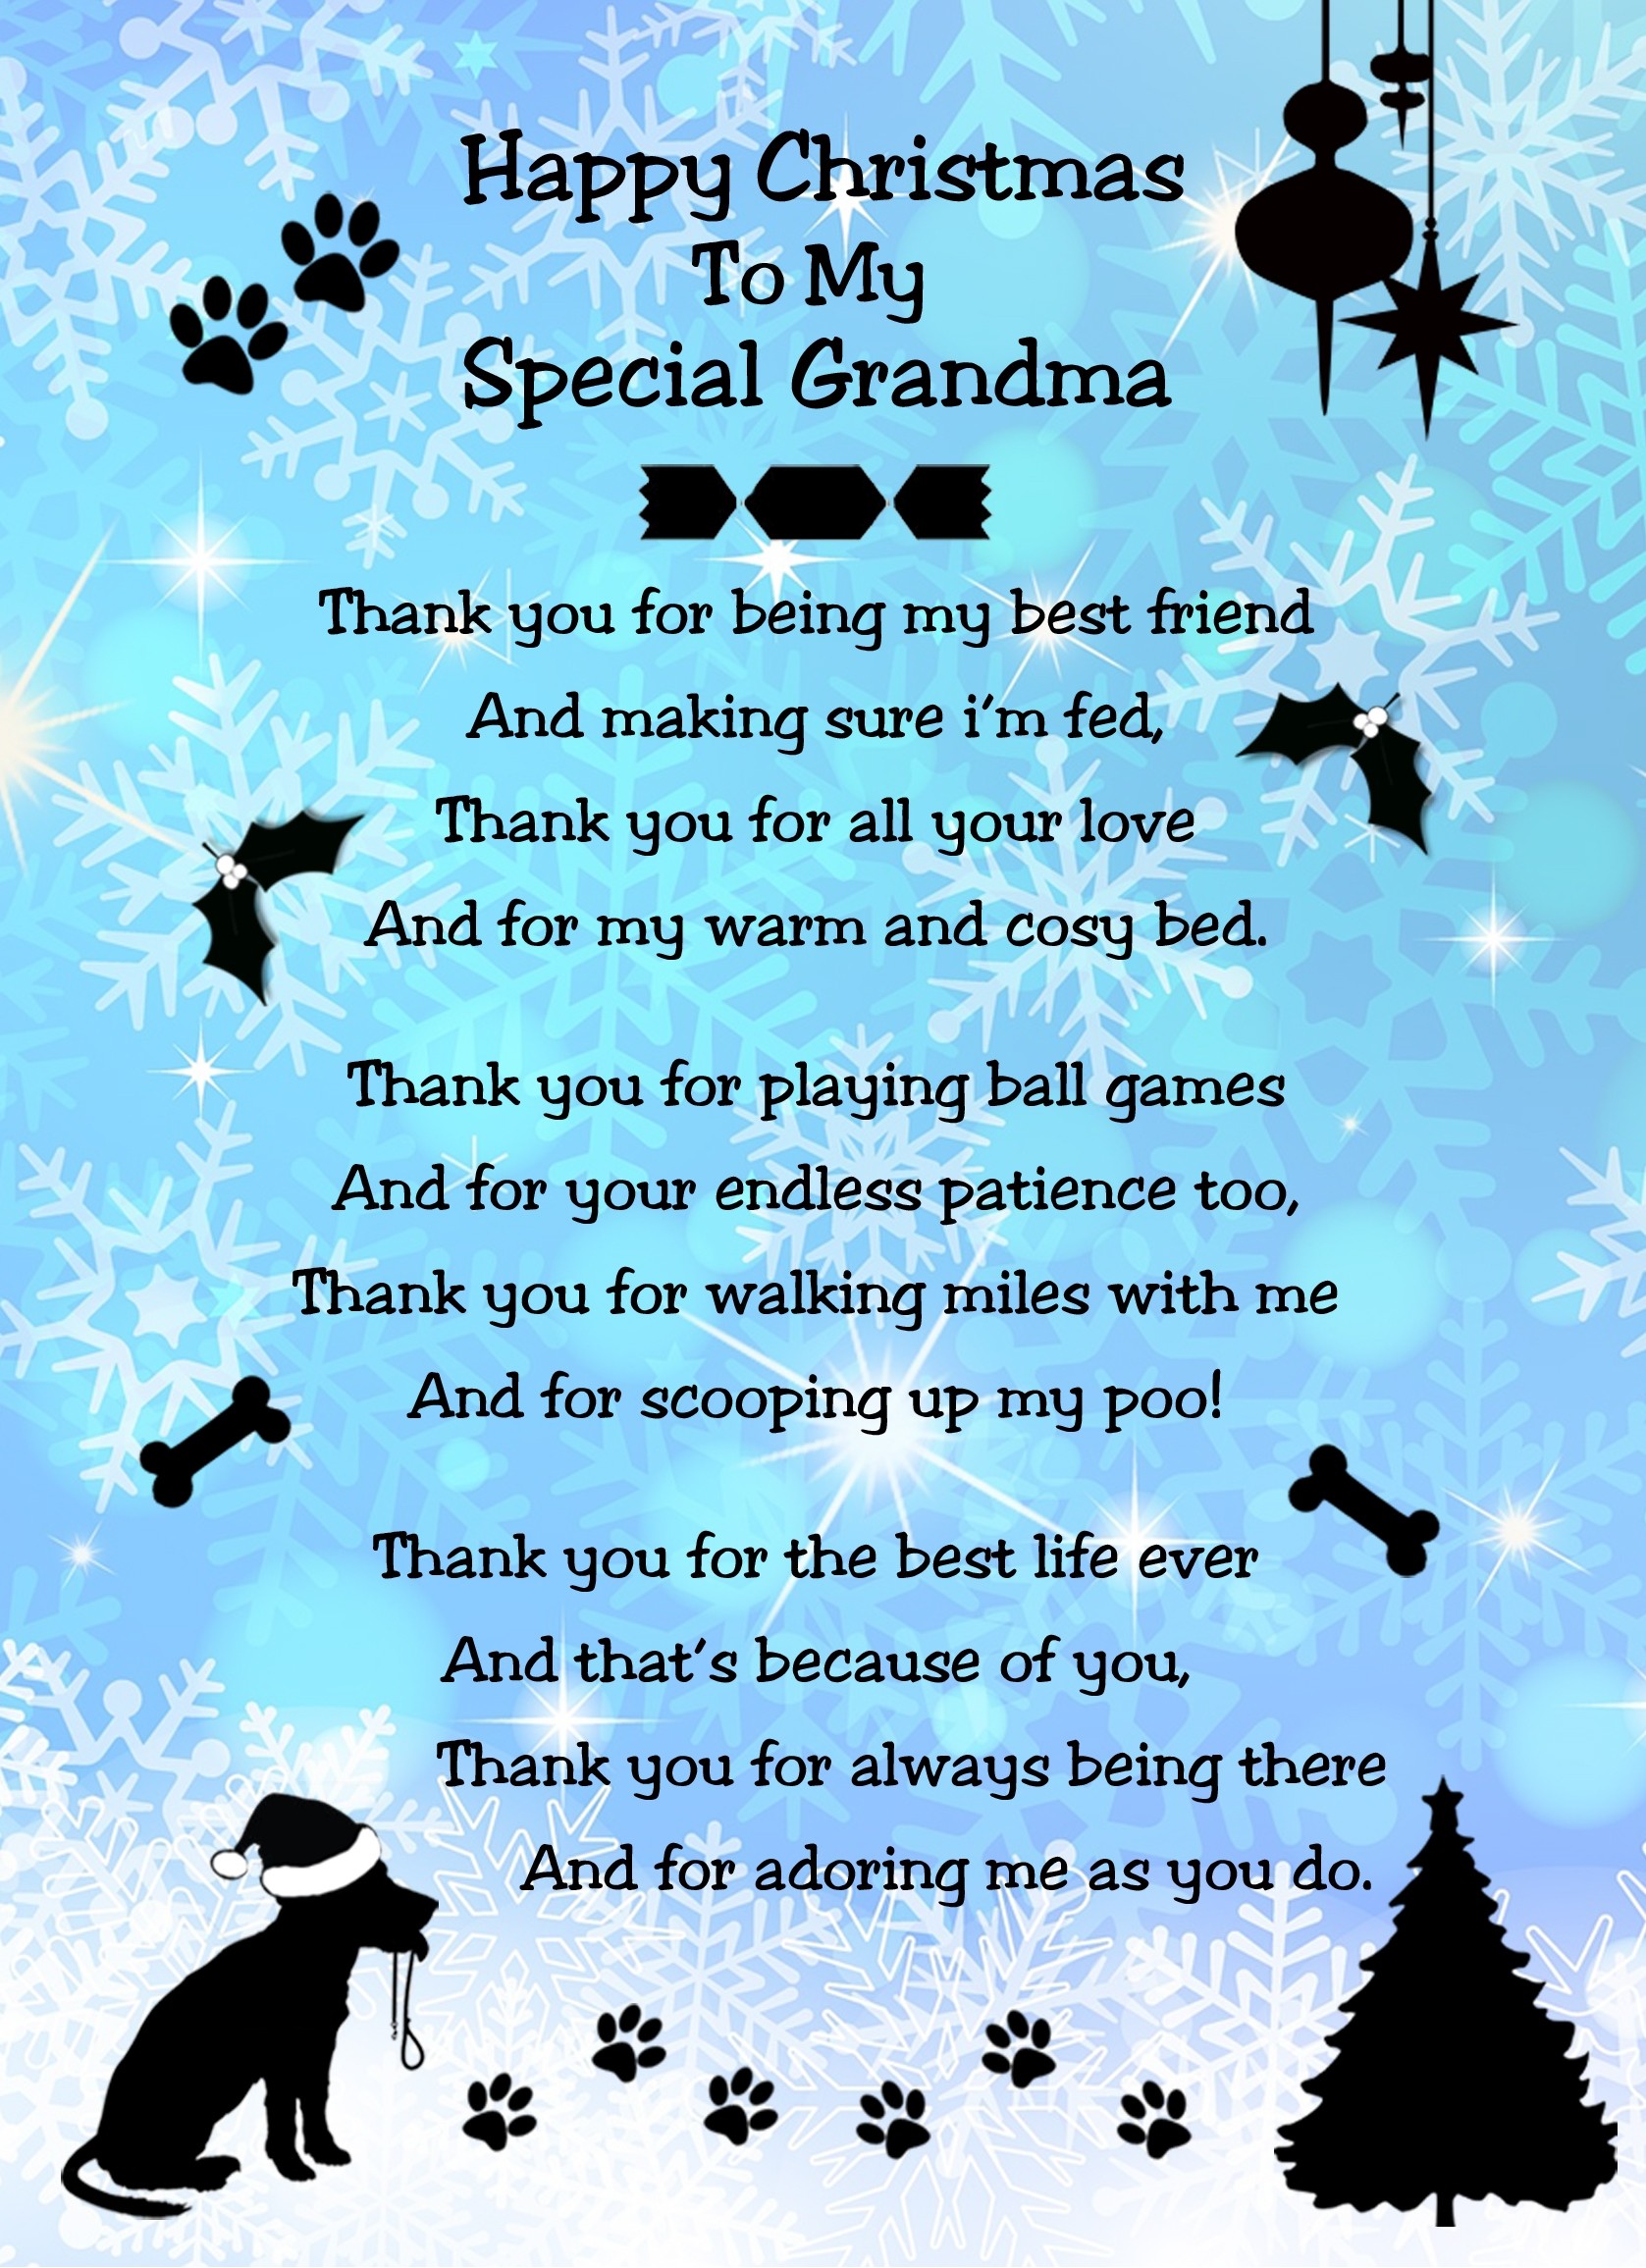 From The Dog Verse Poem Christmas Card (Special Grandma, Snowflake, Happy Christmas)